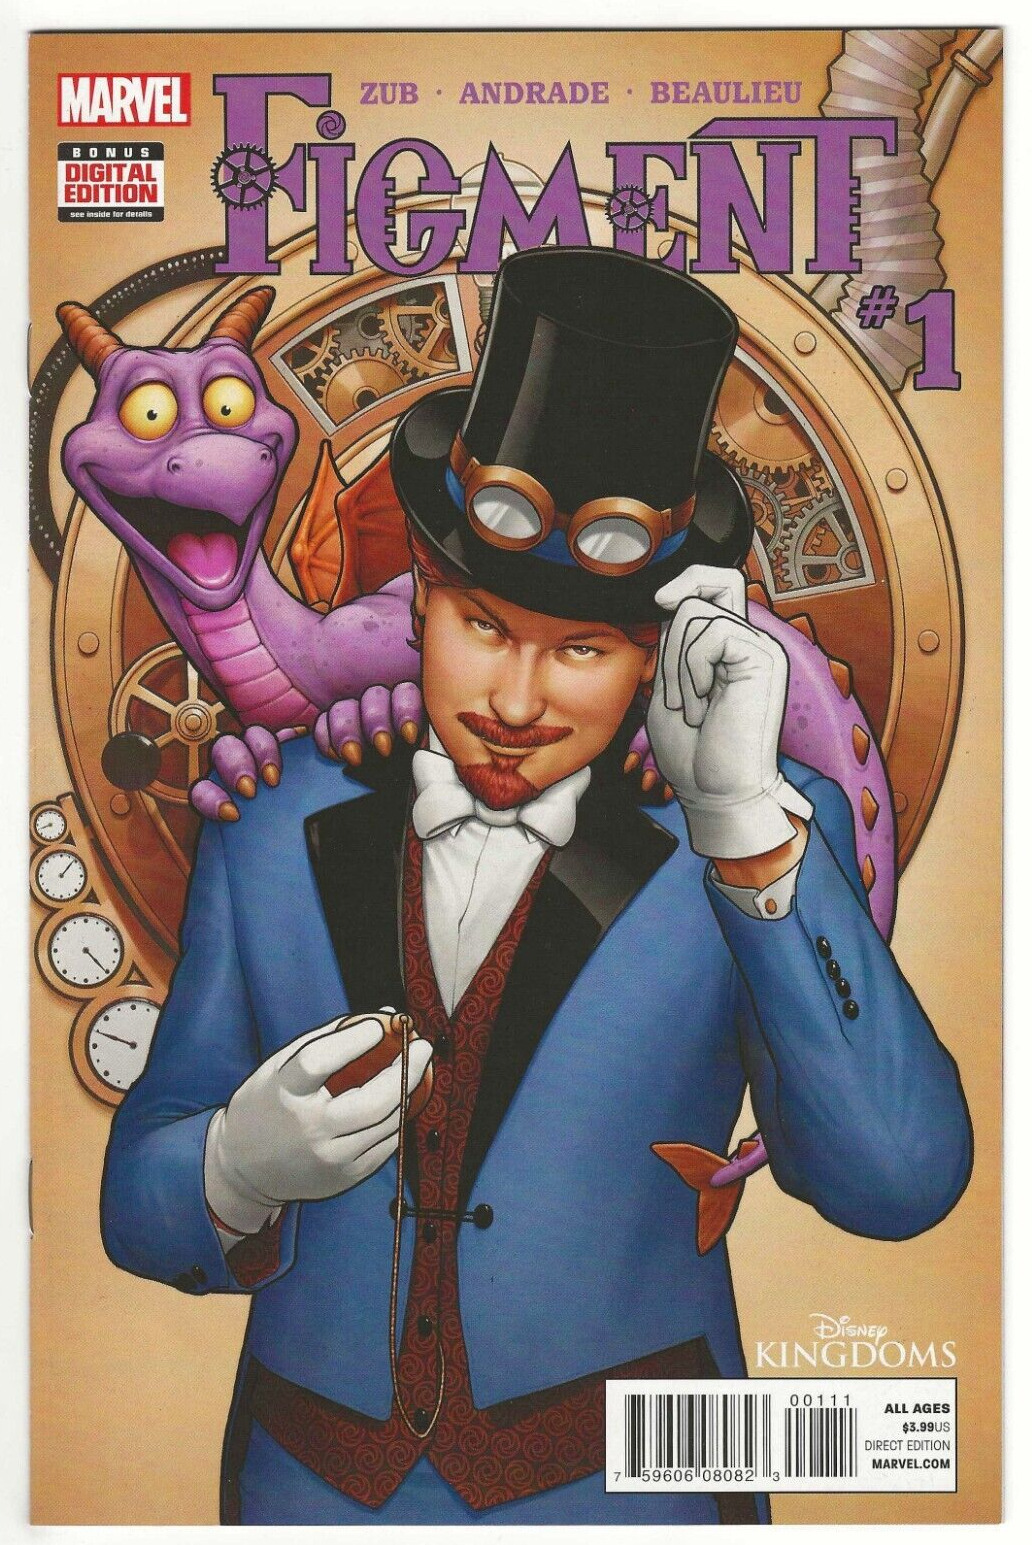 Marvel Comics FIGMENT #1 first printing cover A